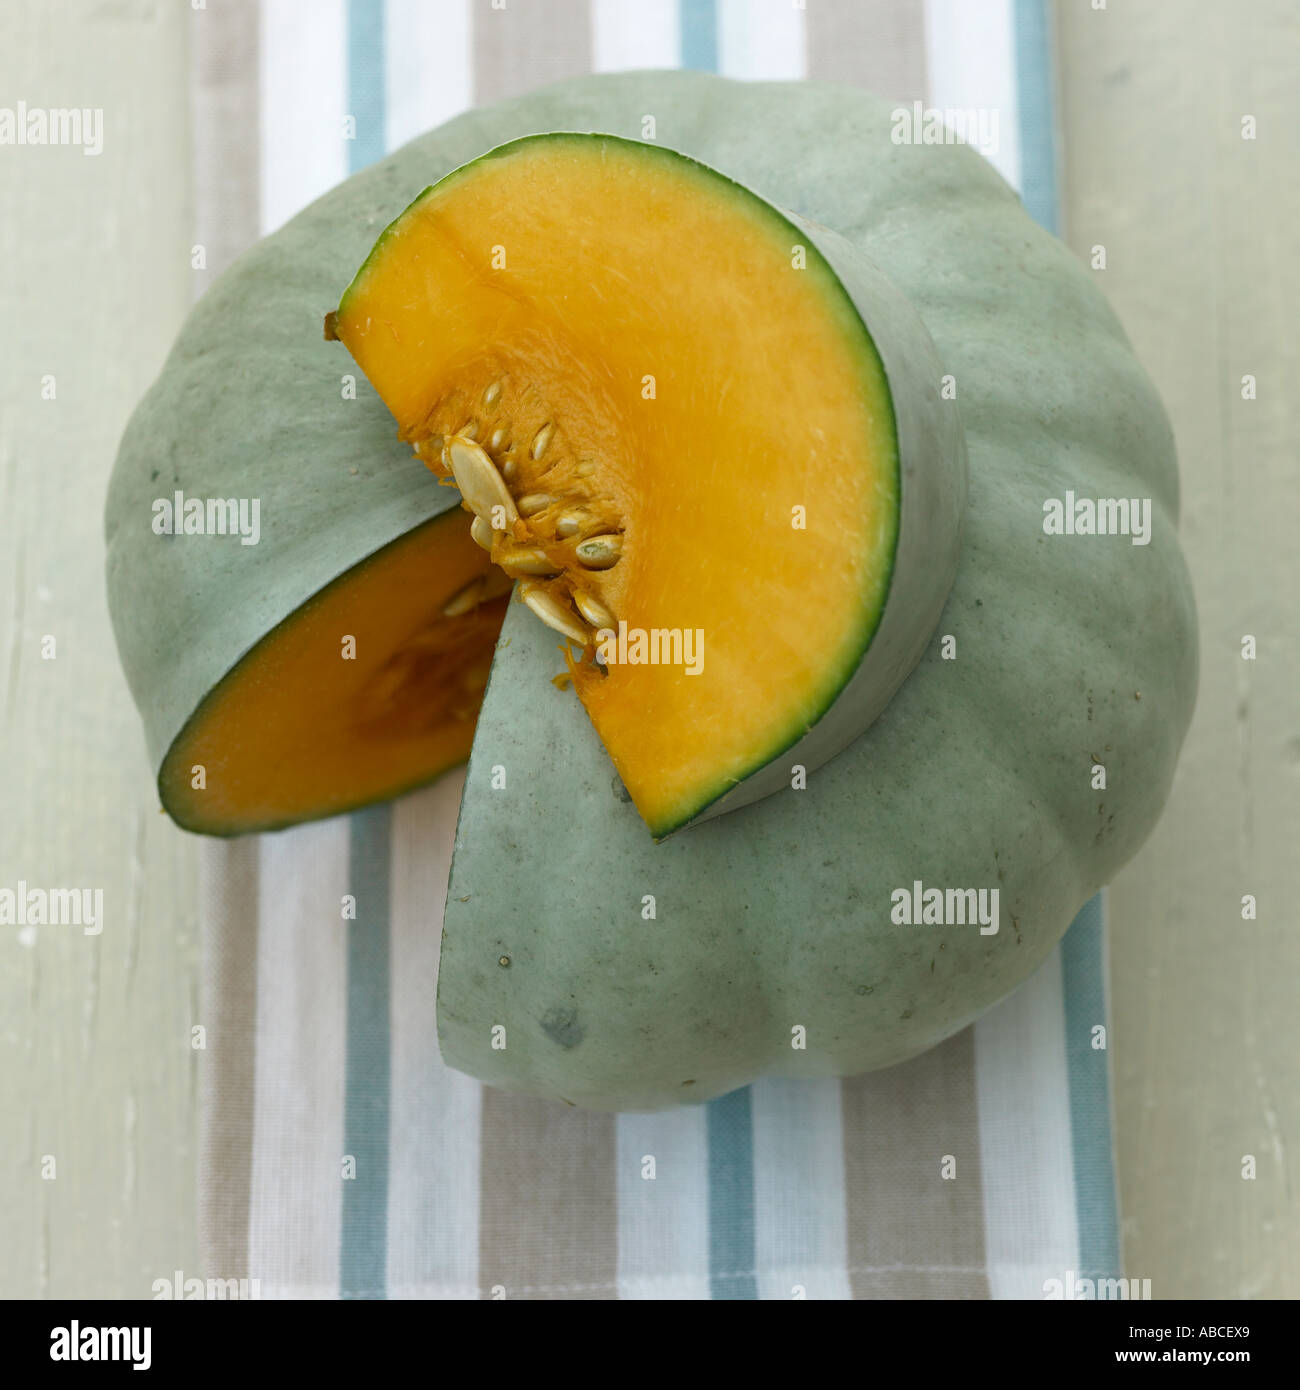 Squash with slice removed on stripey linen cloth Stock Photo